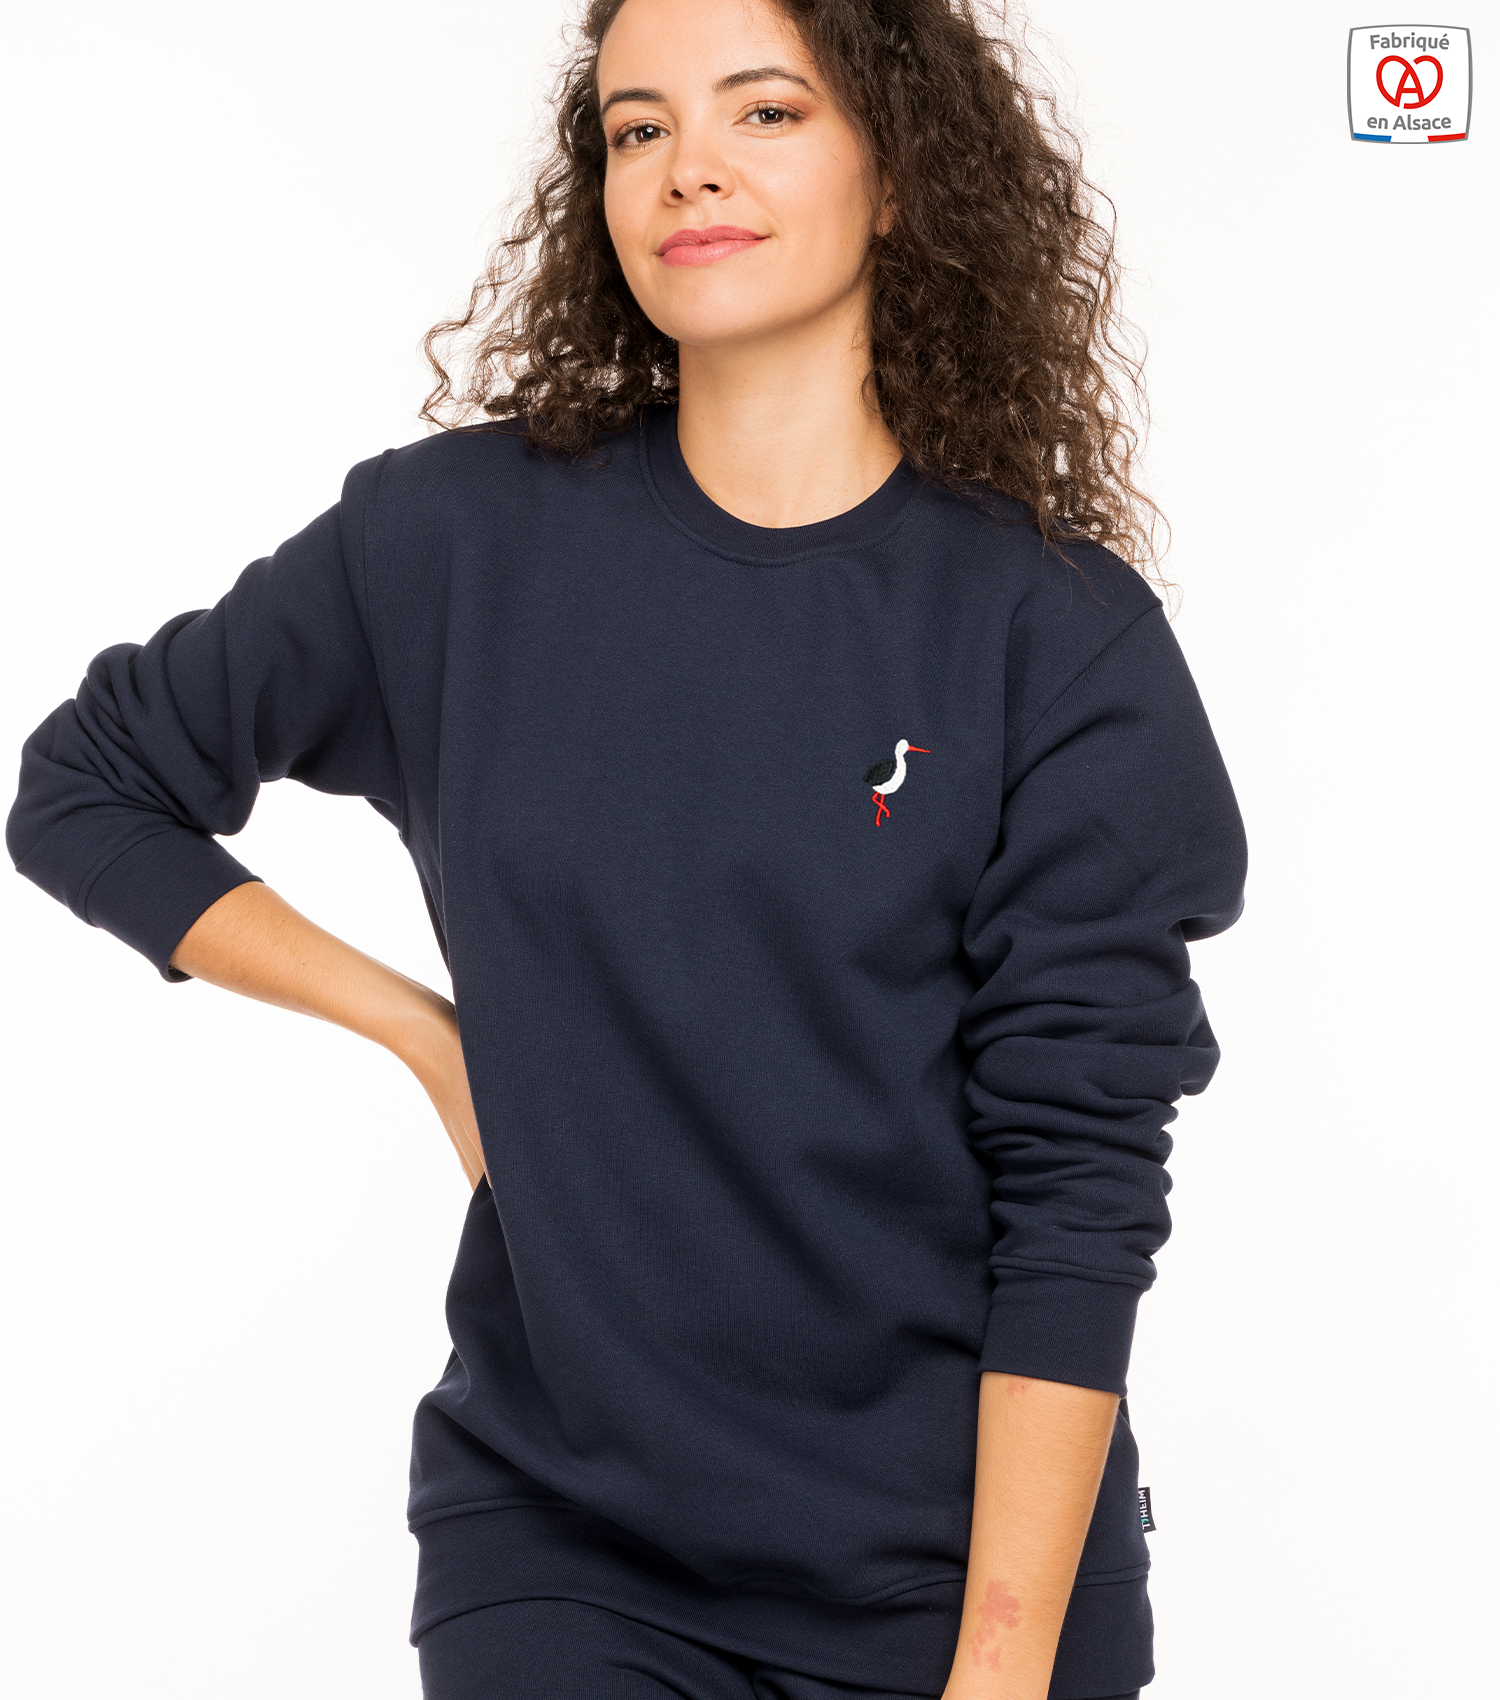 theim-sweat-pour-femme-brode-cigogne-made-in-france-1500-x-1700-px